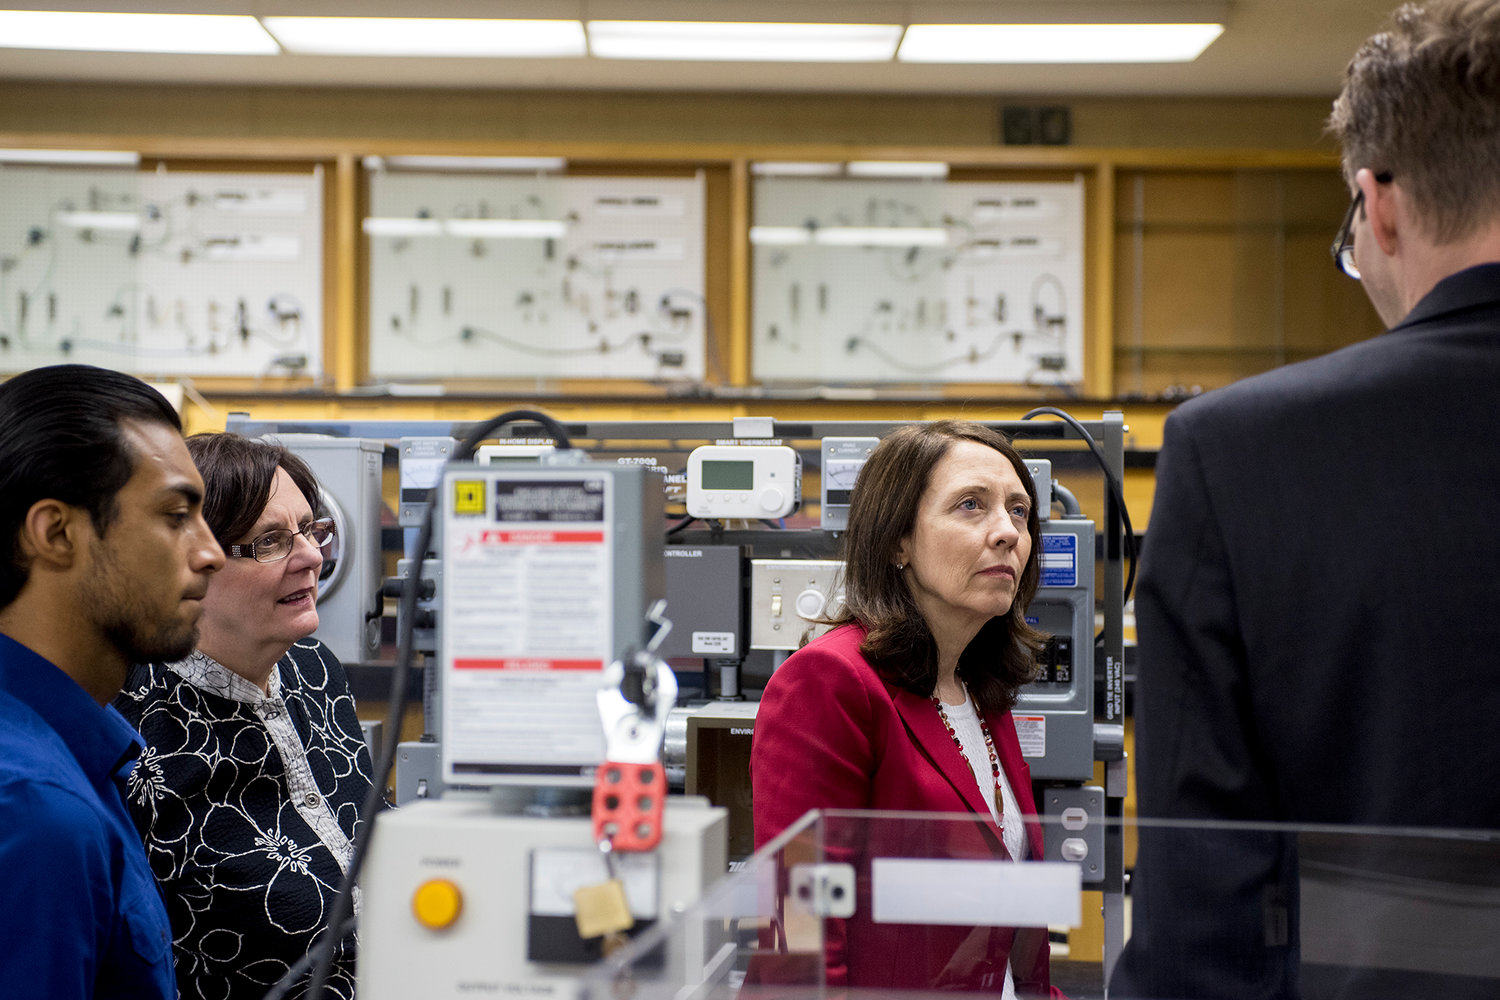 U.S. Sen. Maria Cantwell, D-Washington, listens as former Centralia College student, John Hofman, right, gives a tour of an electrical engineering classroom in Kemp Hall at Centralia College on Wednesday afternoon.